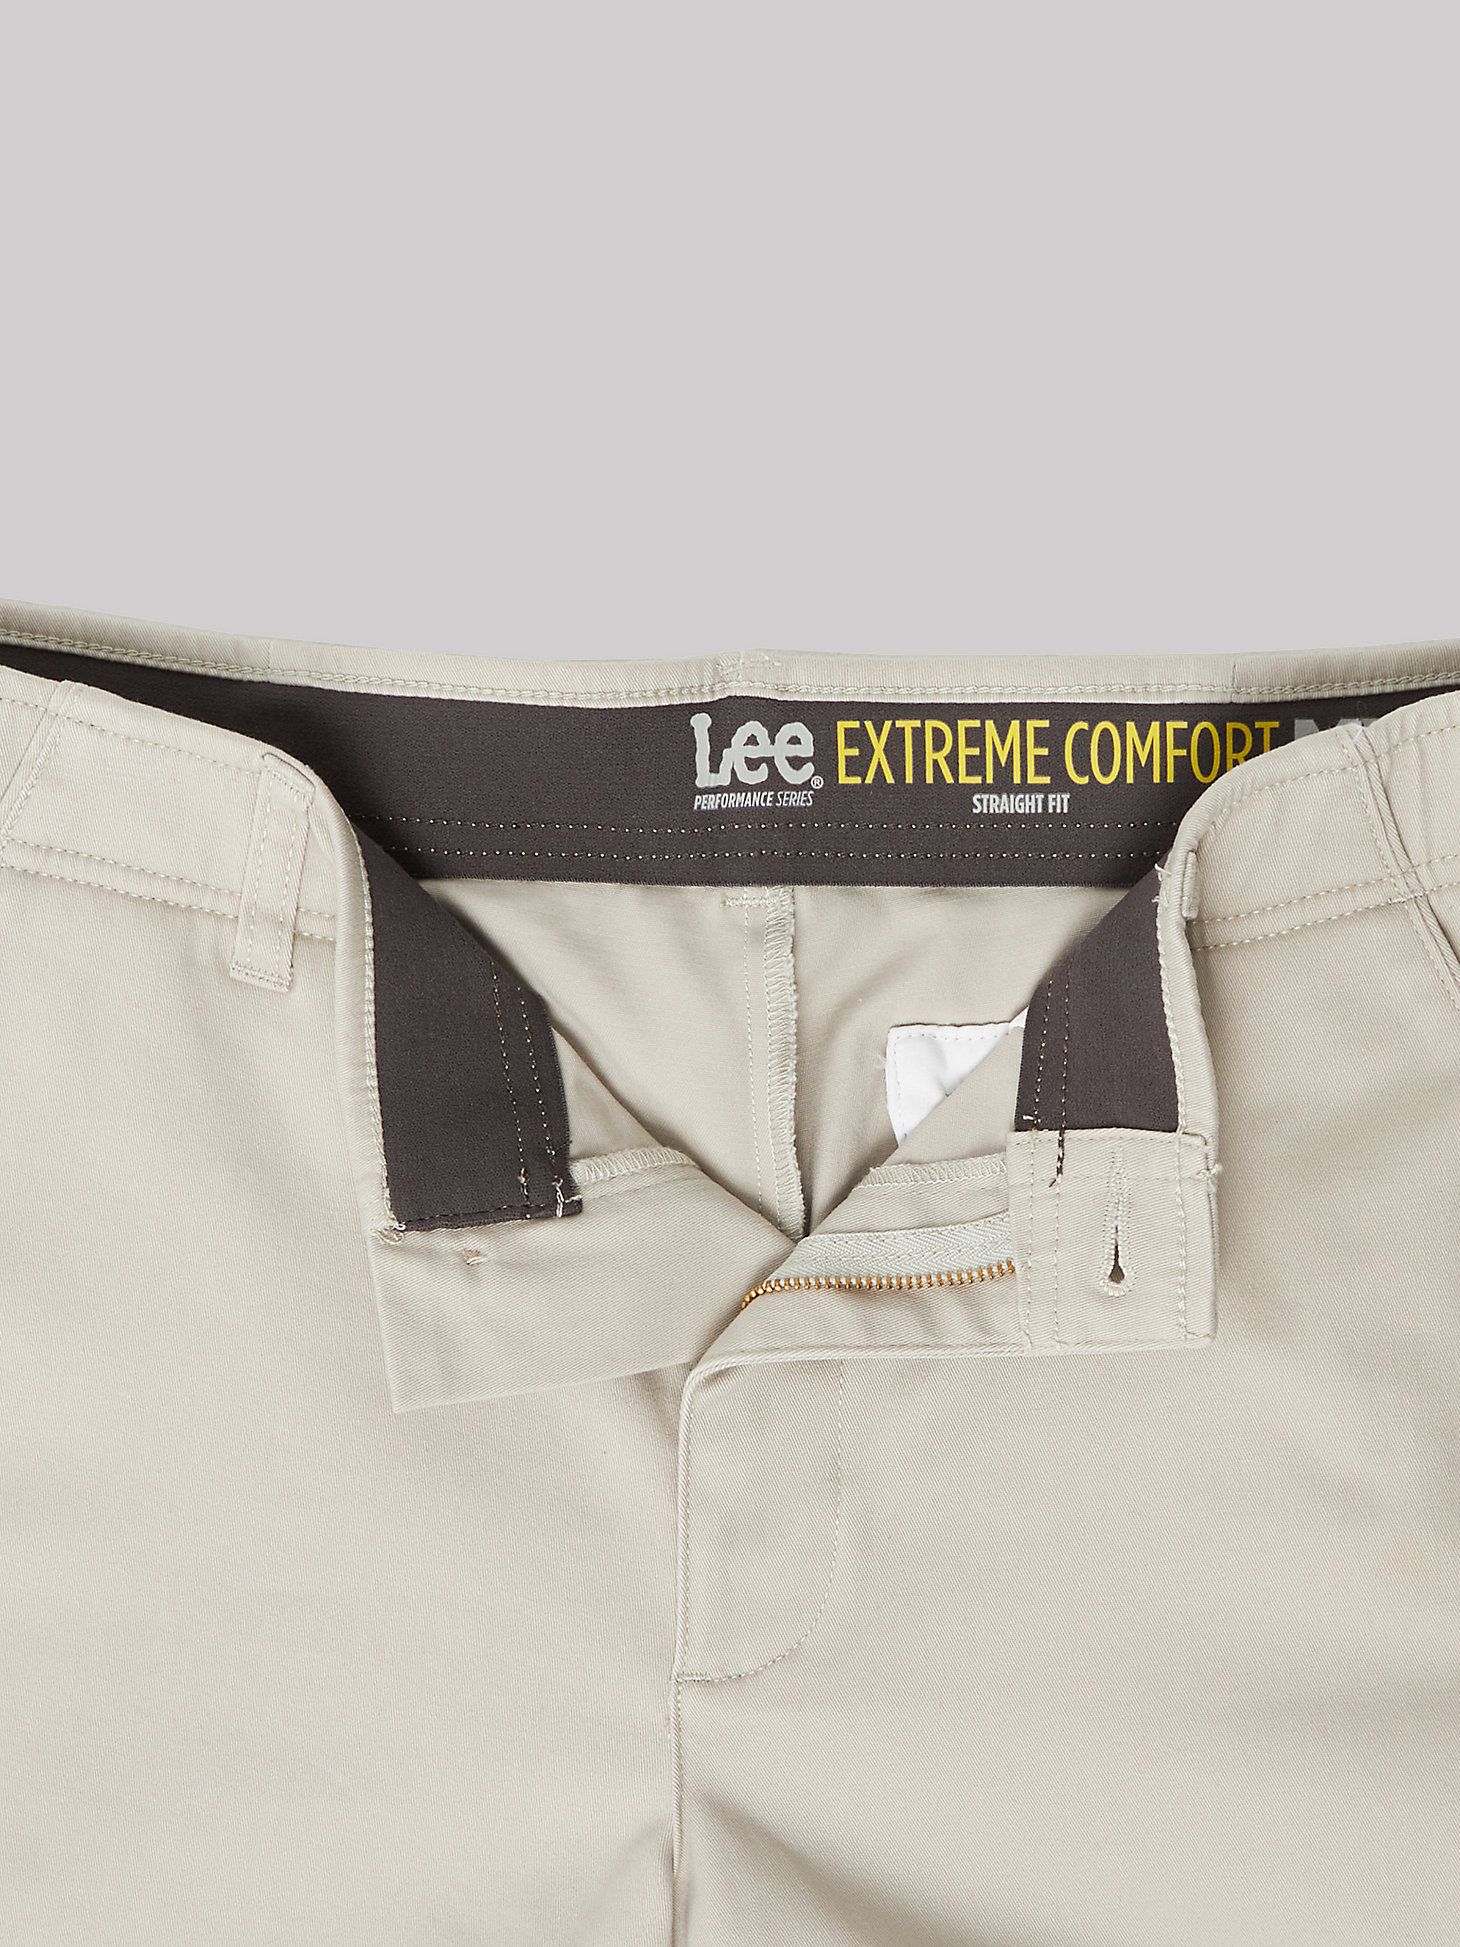 Men's Extreme Comfort MVP Straight Fit Flat Front Pant in Salina Stone alternative view 4